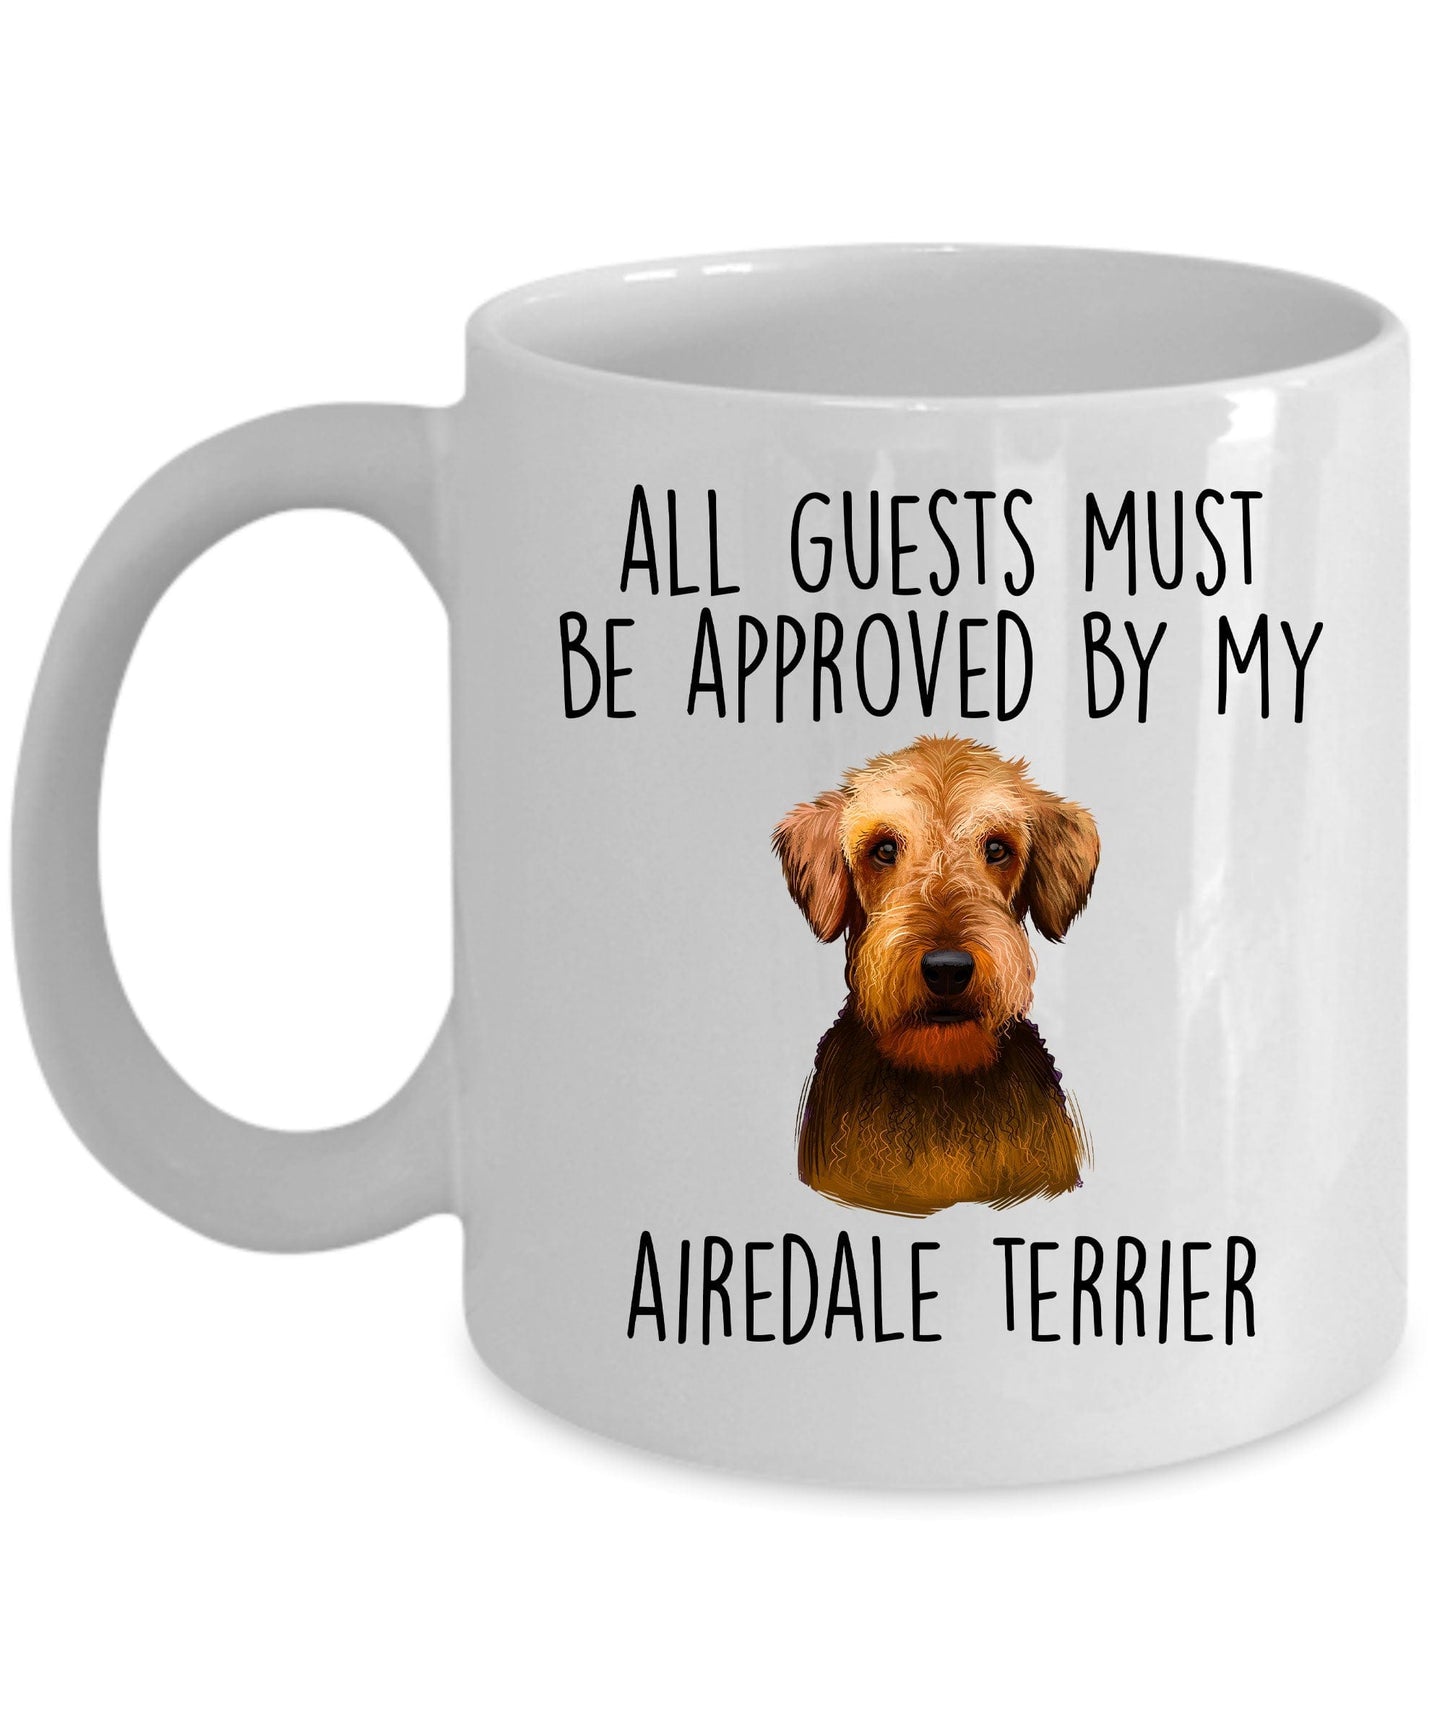 Funny Dog Ceramic Coffee Mug - All Guests Must be Approved by my Airedale Terrier